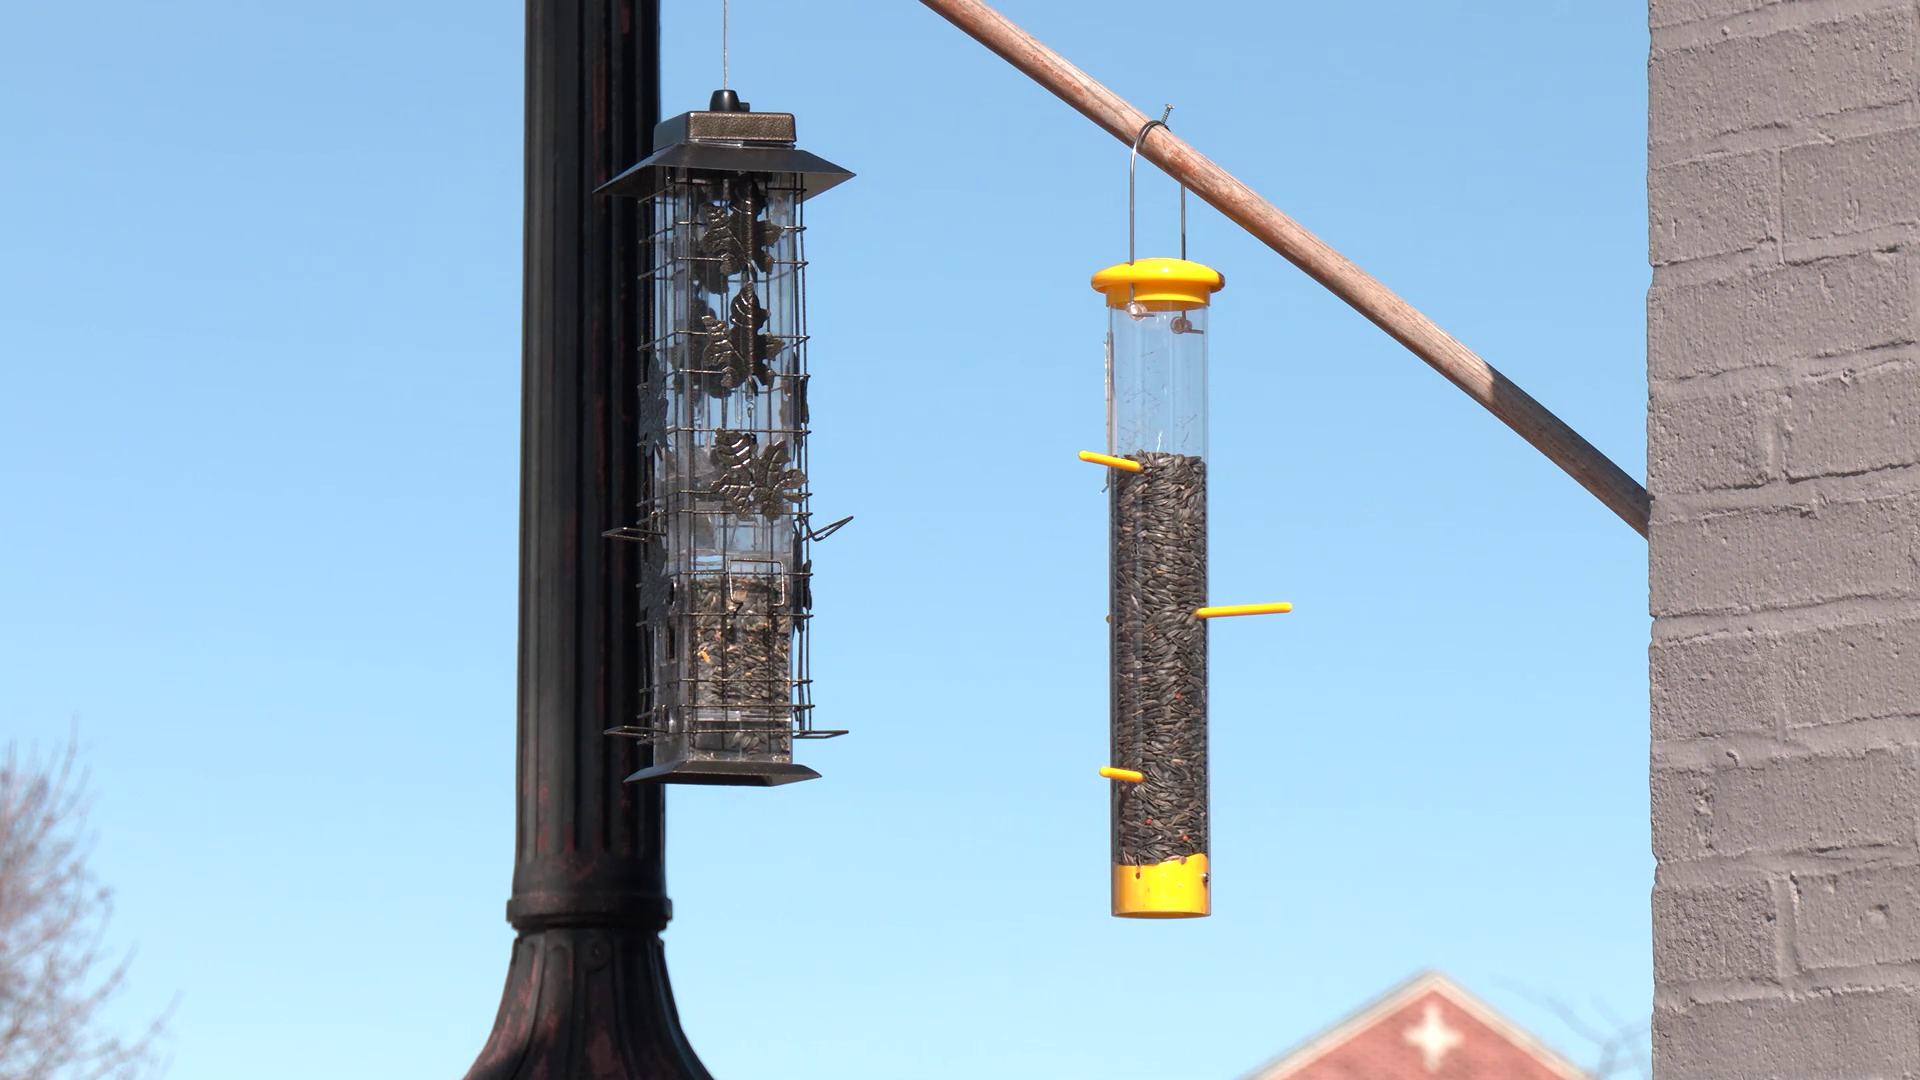 Local business fights ordinance banning bird feeders in downtown Manistee as fines pile up